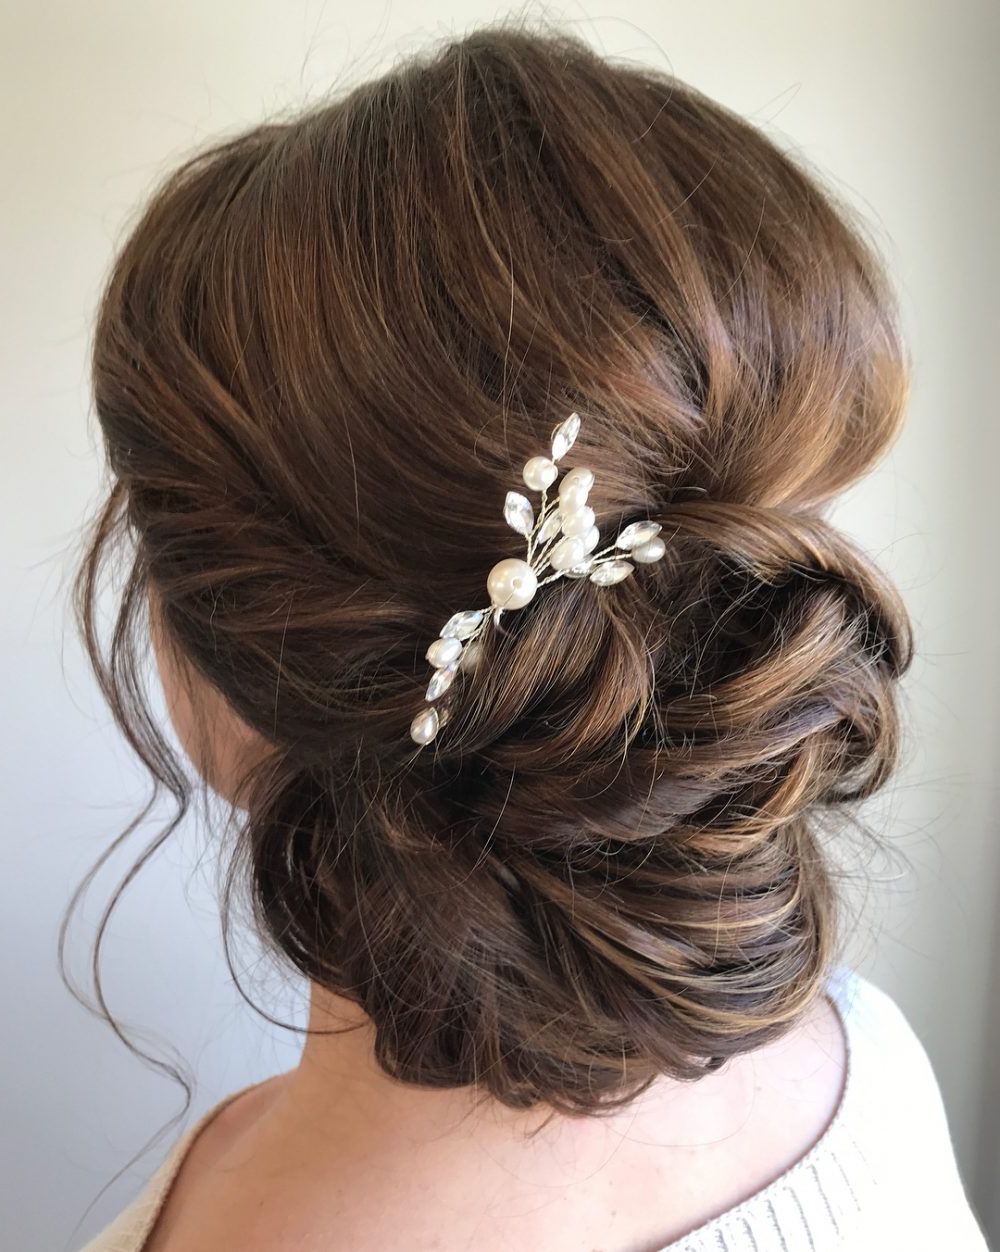 33 Breathtaking Loose Updos That Are Trendy For 2019 Within Most Recent Low Petal Like Bun Prom Hairstyles (View 7 of 20)